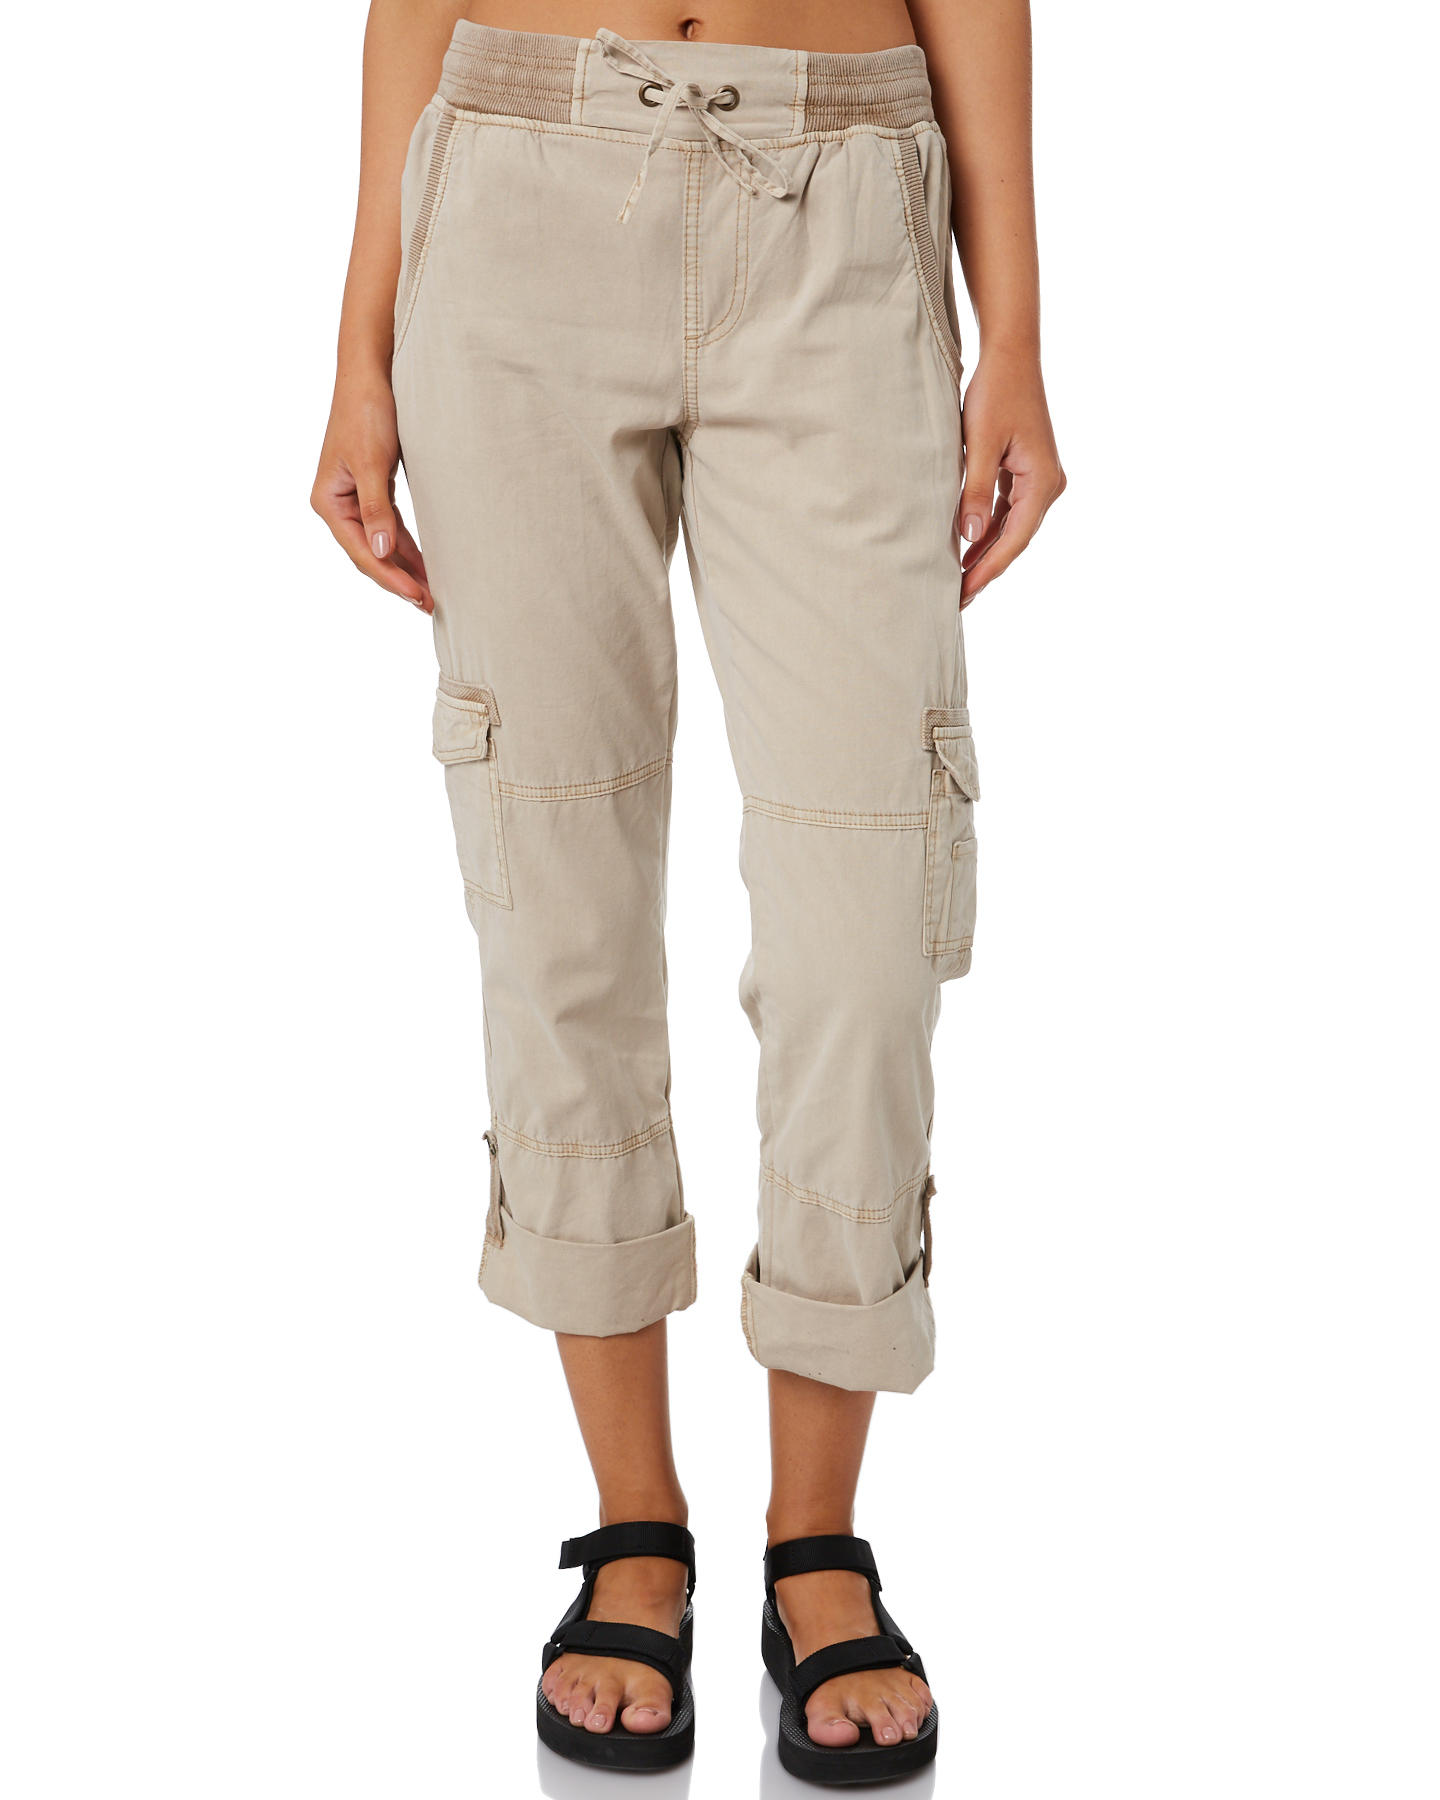 Swell Kailey Cargo Pant - Tan | SurfStitch